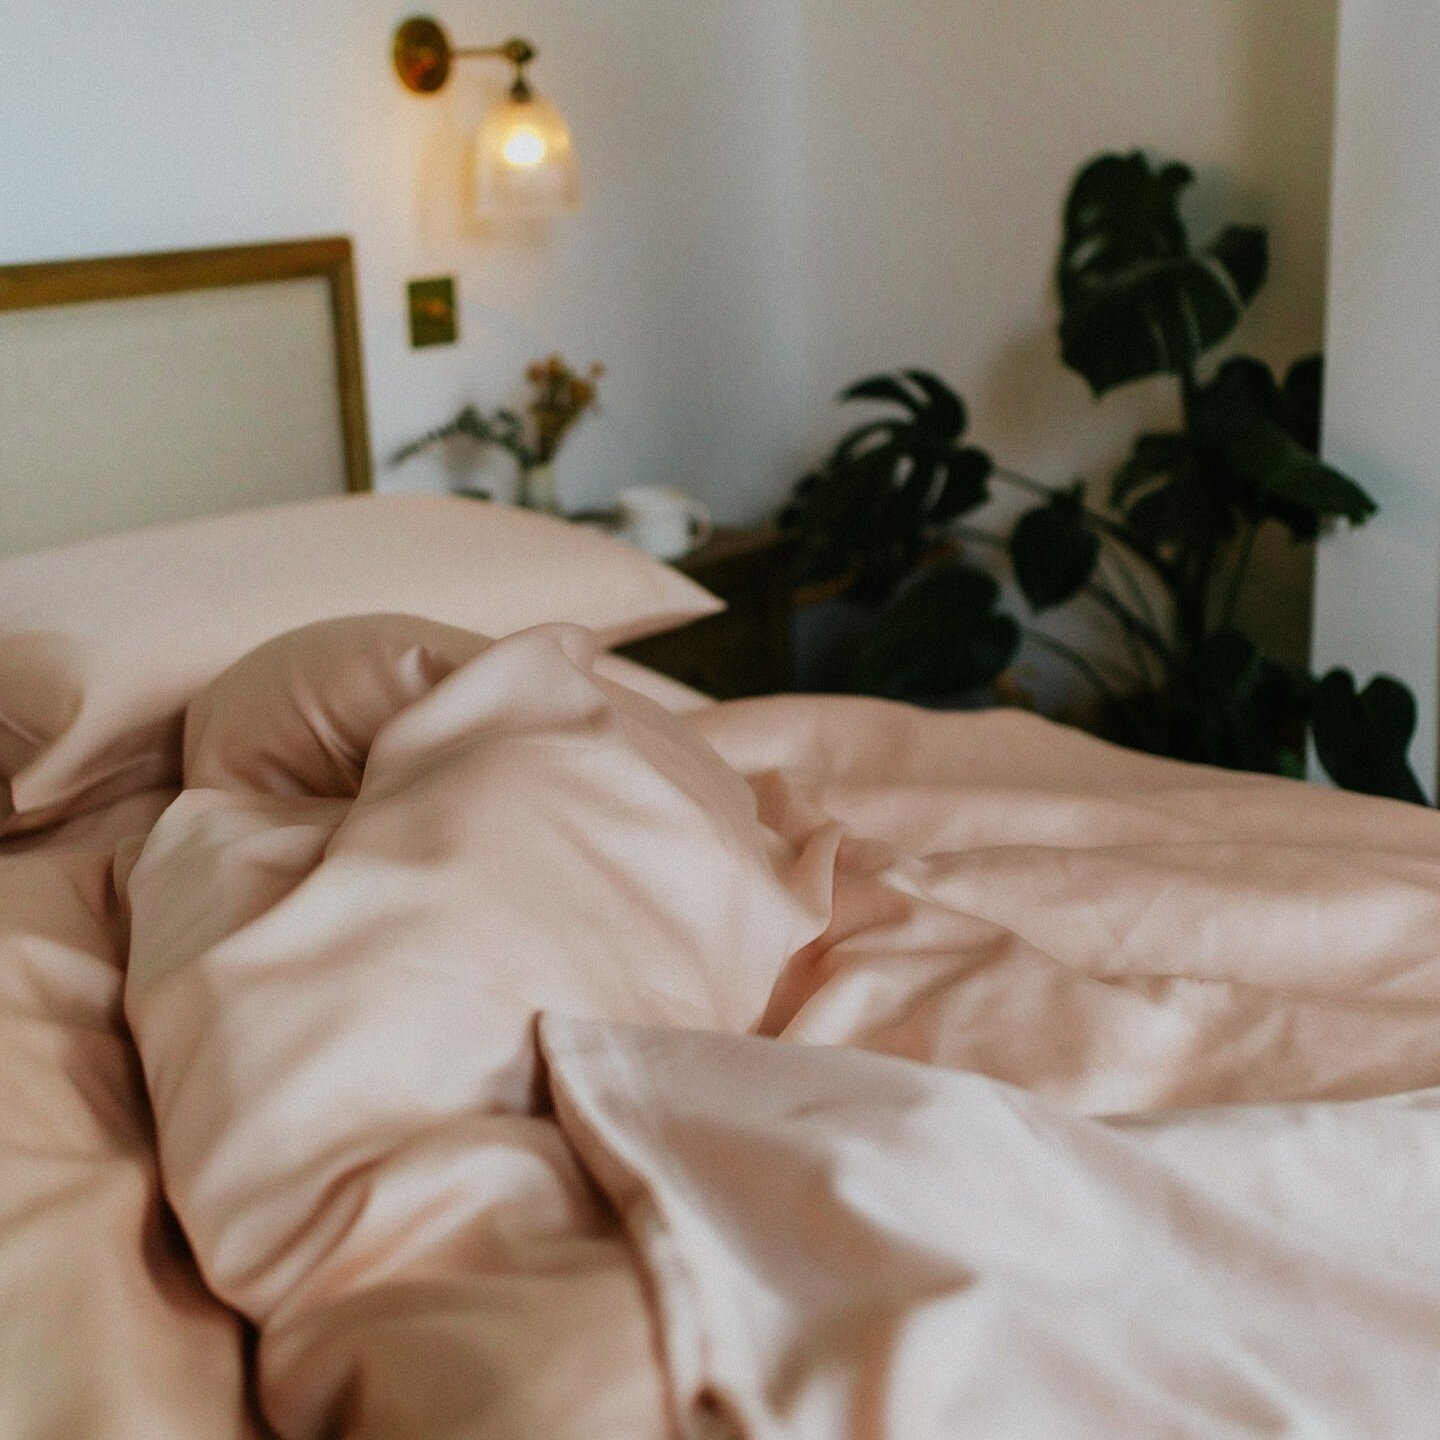 Soft, fresh, botanical bed linen ready for you to hibernate in. 

Our duvet sets are made from 100% TENCEL&trade; lyocell fibres, which is why they feel so extraordinarily smooth and soft, keeping you wrapped up in a cosy bedding hug you'll never wan